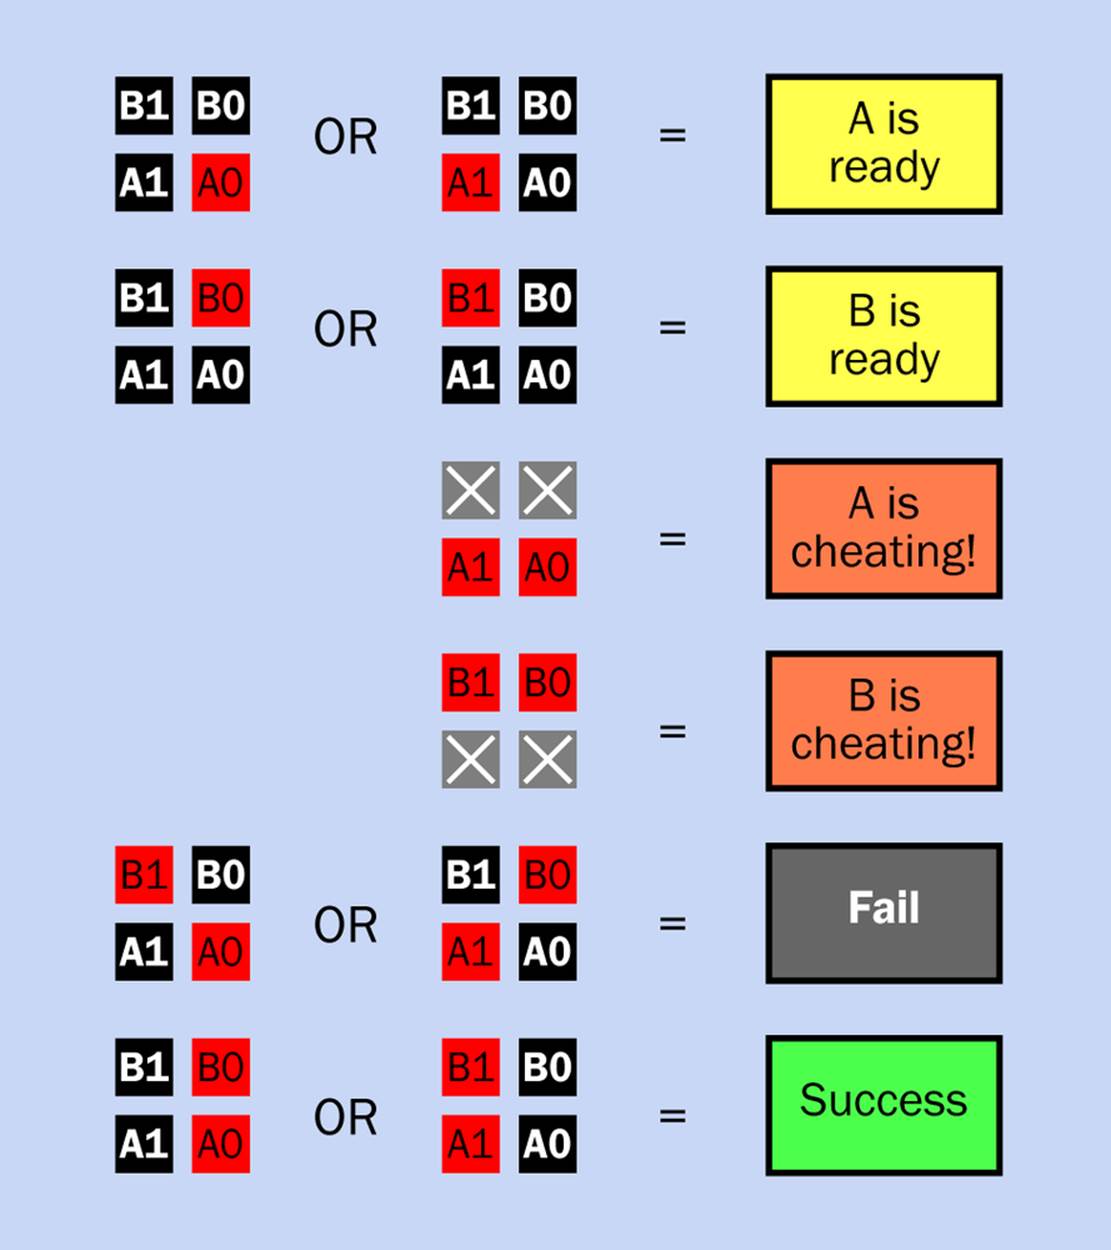 In this chart, A0, A1, B0, and B1 indicate a button that is pressed (red) or not pressed (black). A gray X means that in that particular test, the state of the button is irrelevant and can be ignored. The colored boxes on the right represent the indicators that should light up in response to each combination of buttons.